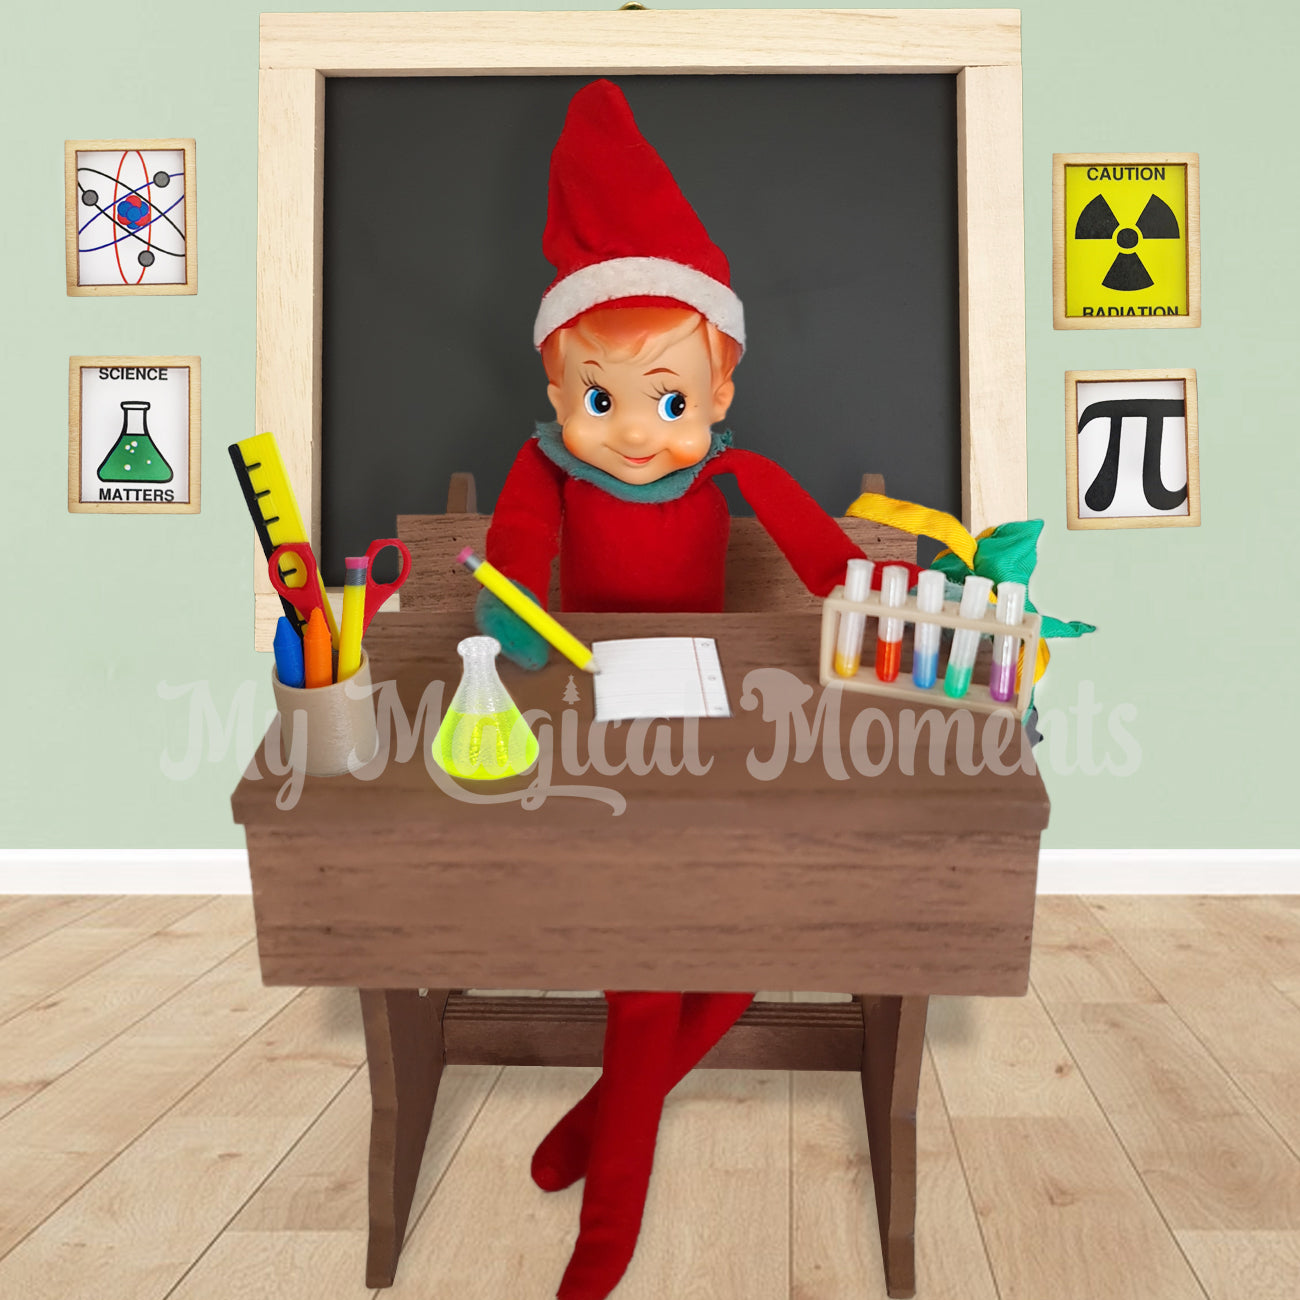 Vintage Elf sitting at a school desk with a miniature pencil, chemistry set and chalkboard behind them